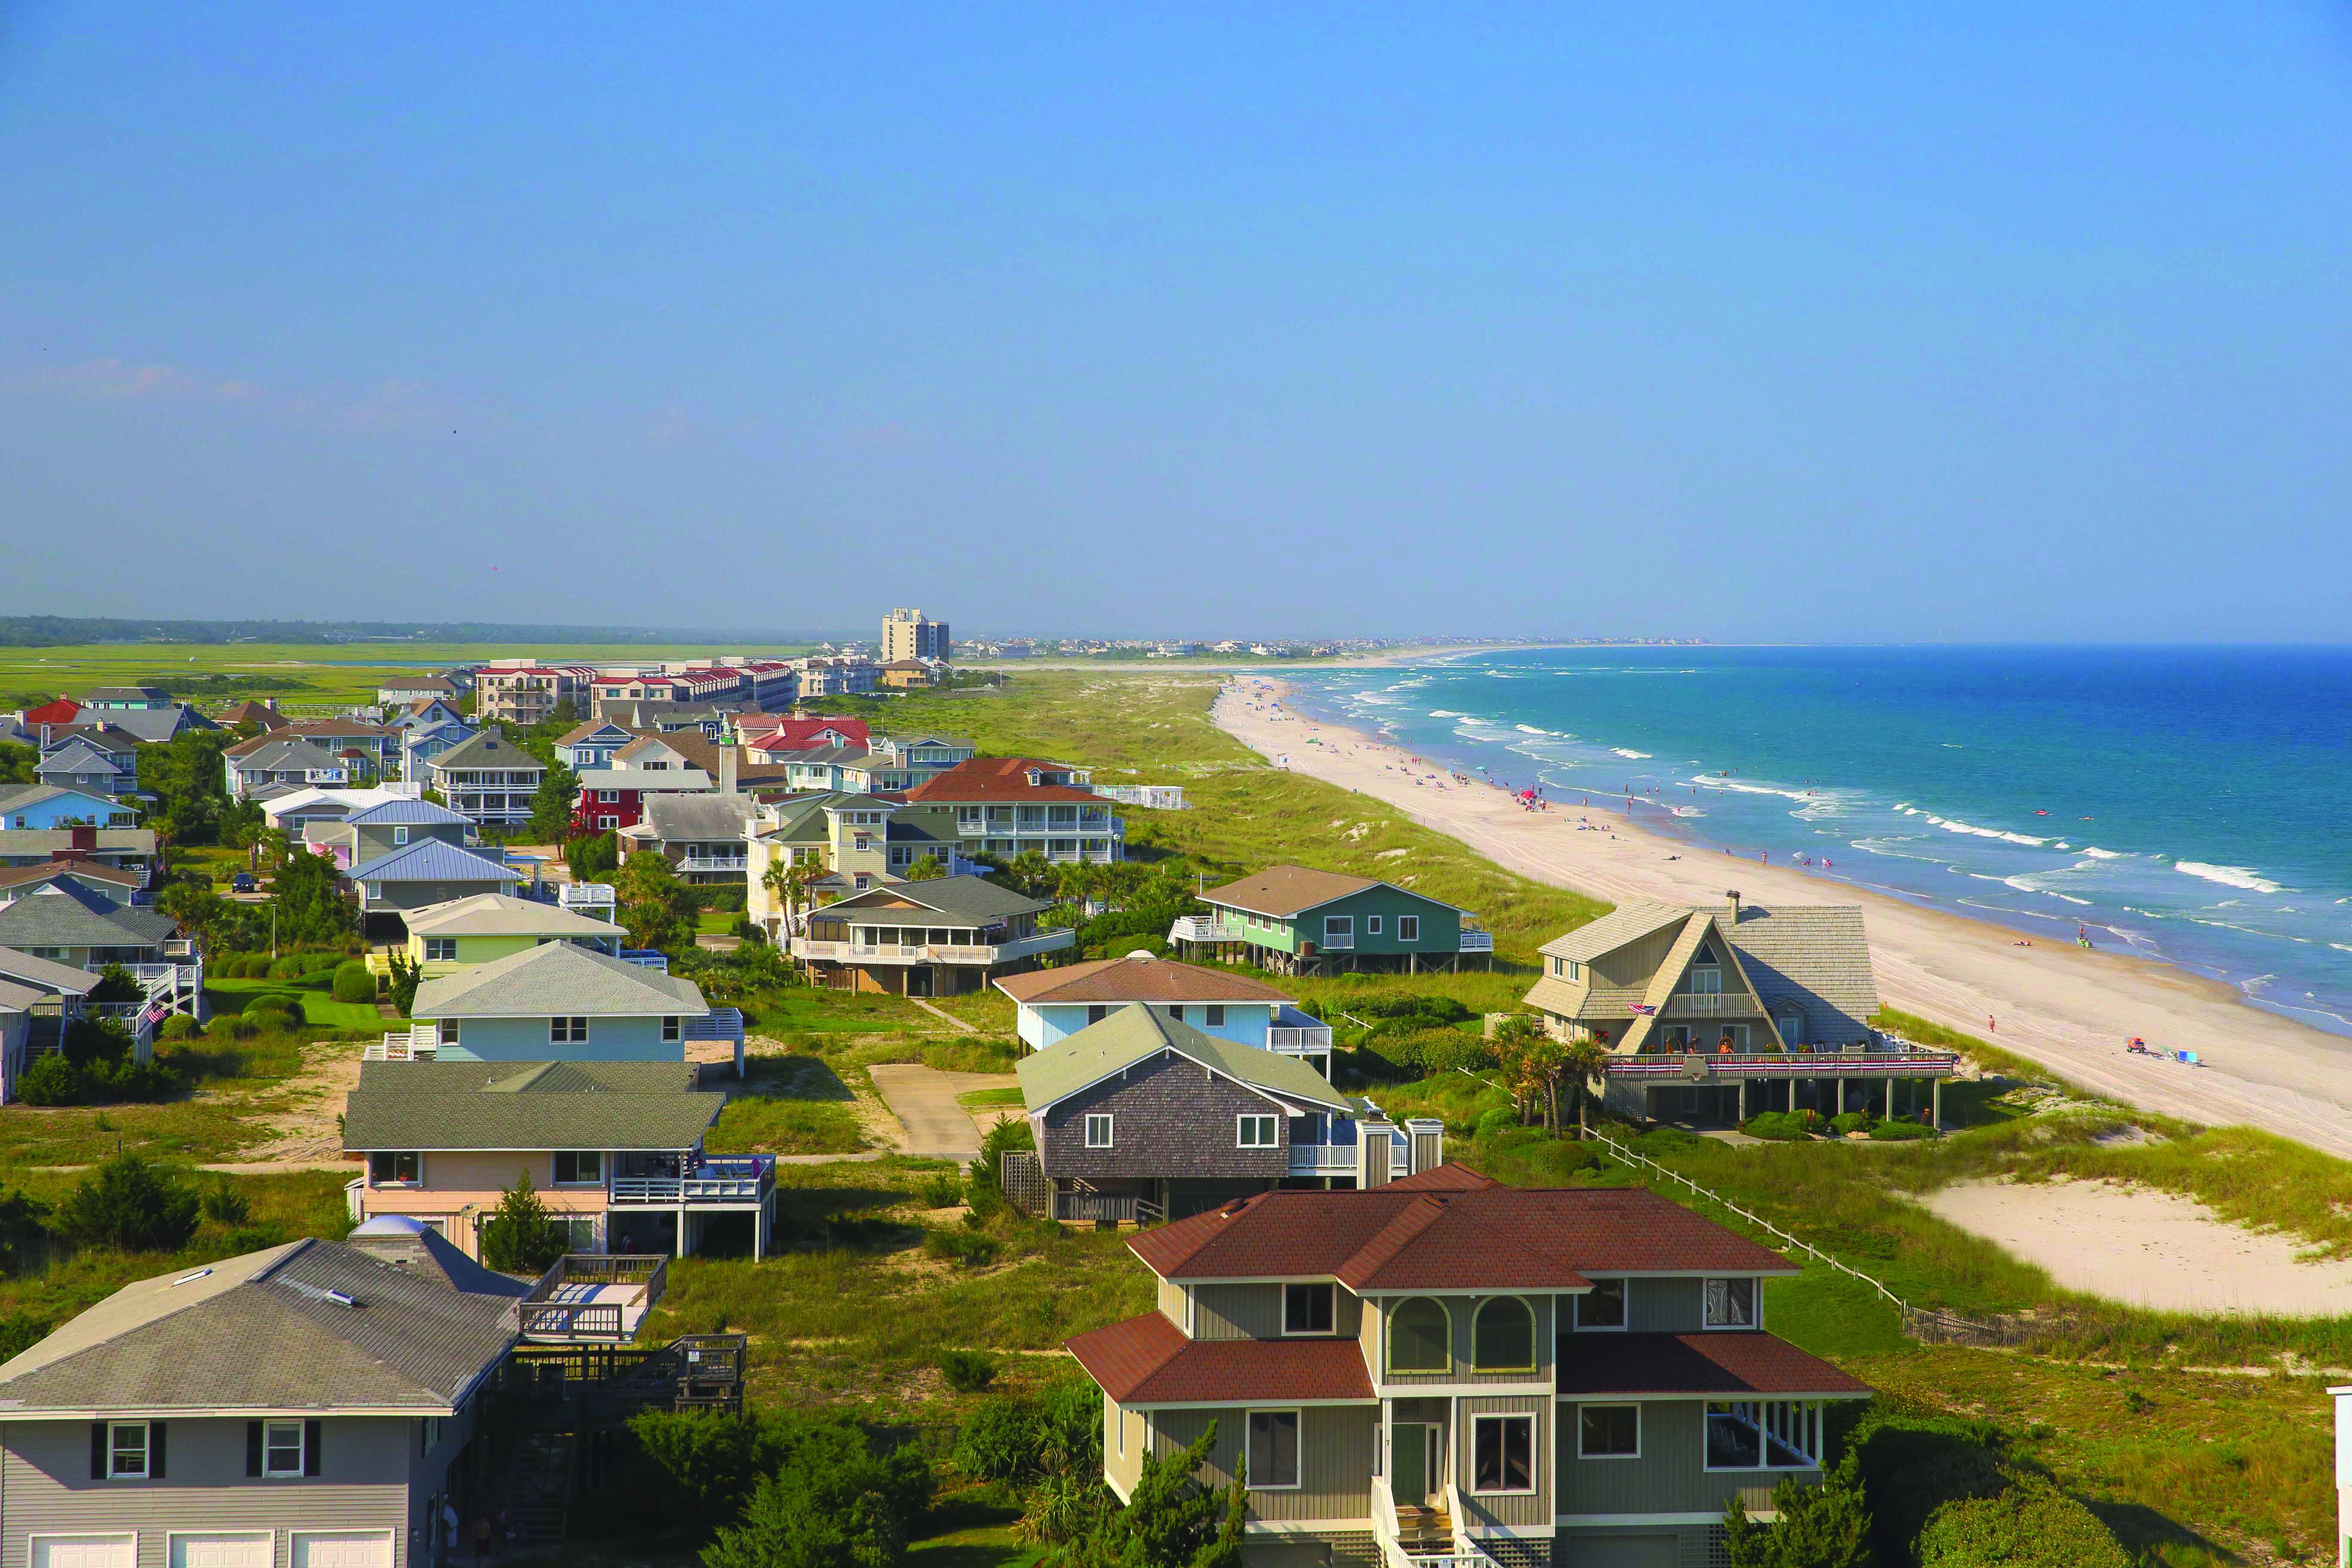 How do you find beach rentals in Wilmington NC?